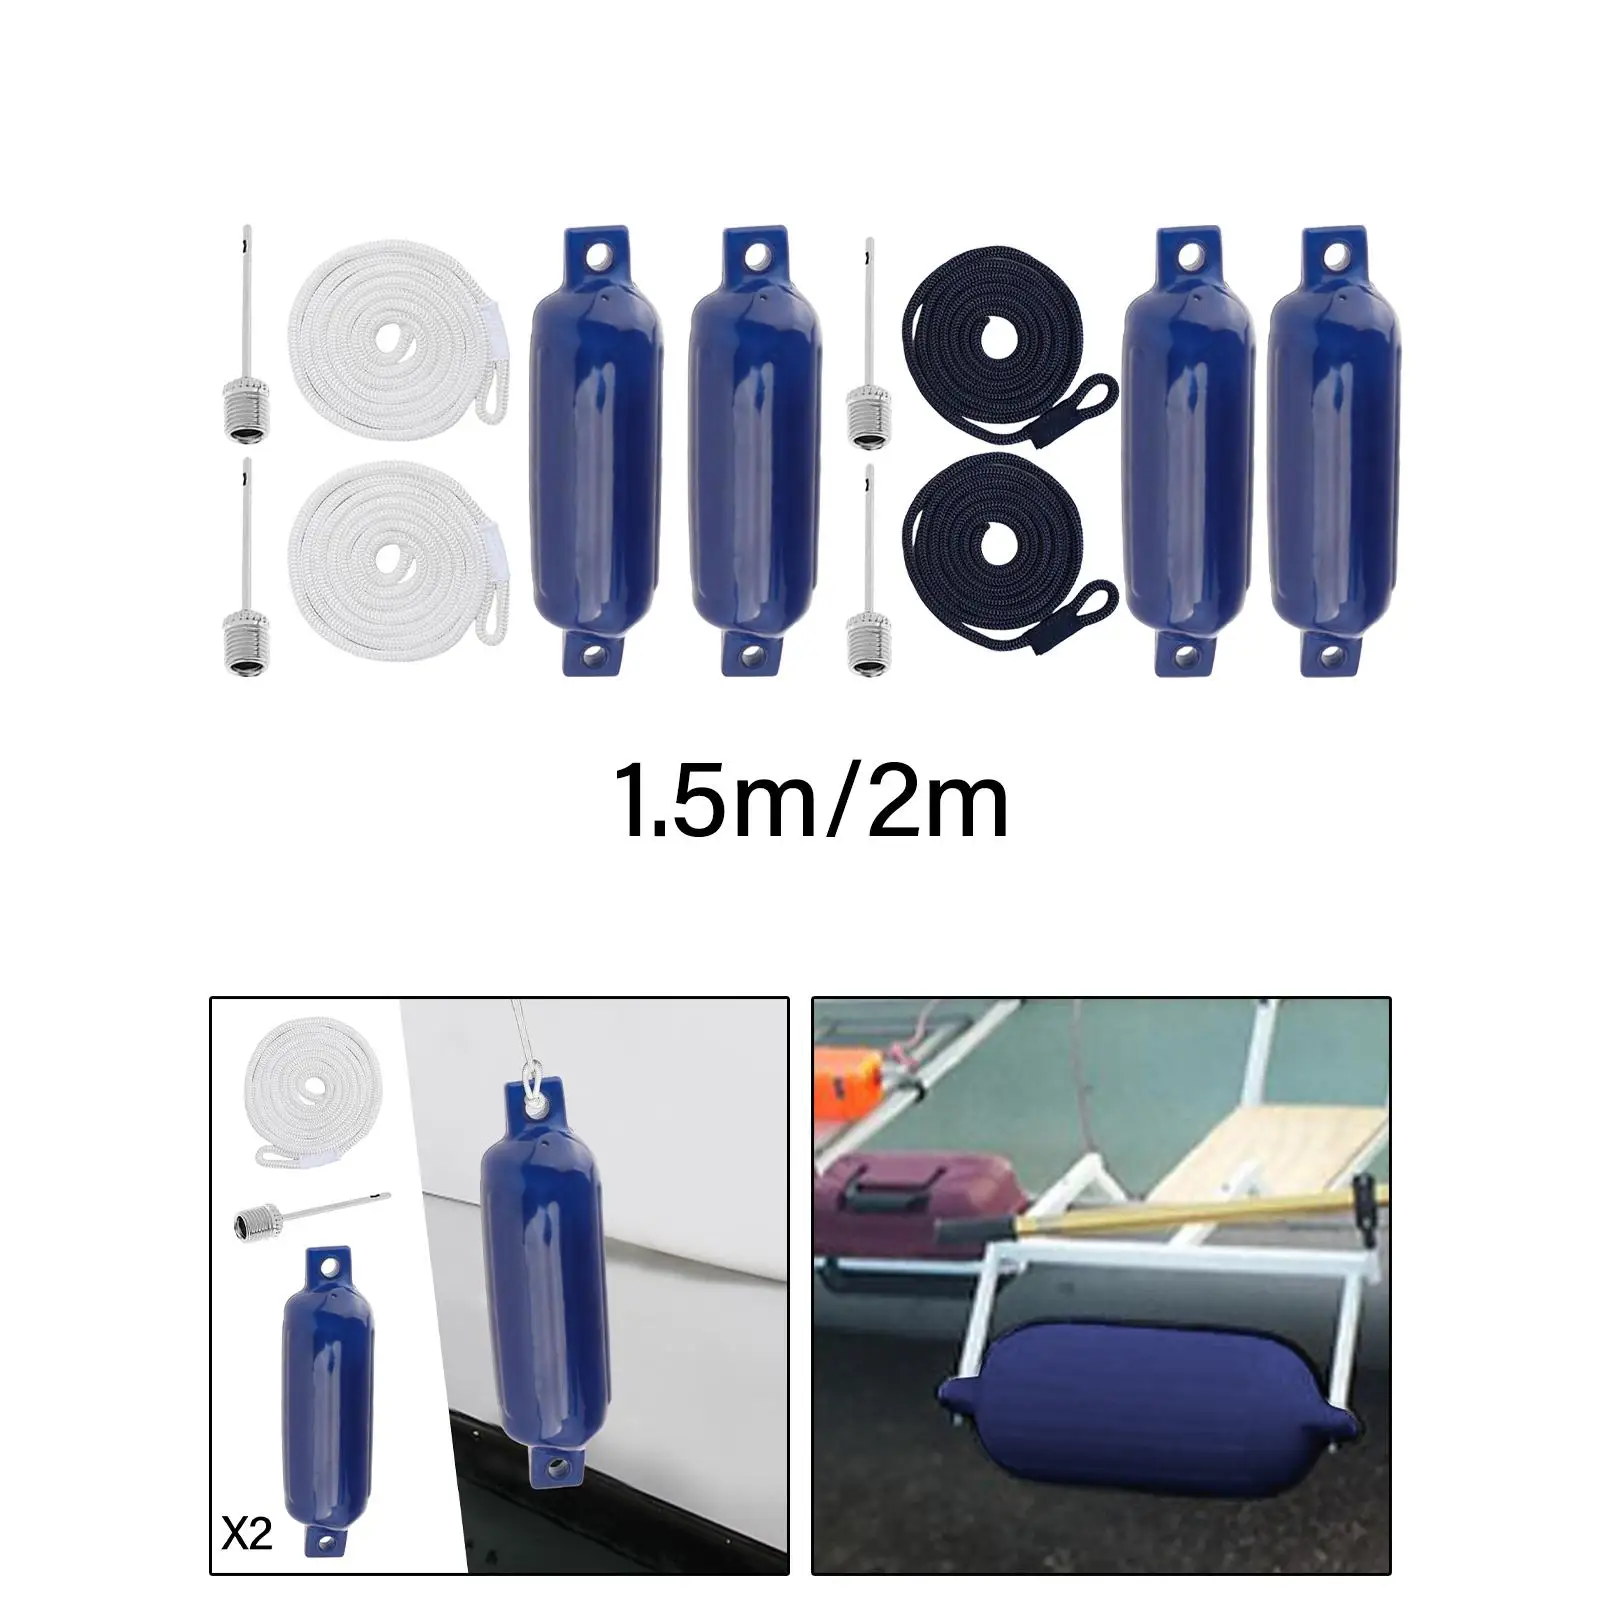 Boat Fendesr Boat Accessories with 2 Ropes Boat Fenders Bumpers for Pontoon Speedboat Yacht Sailboats Fishing Boats